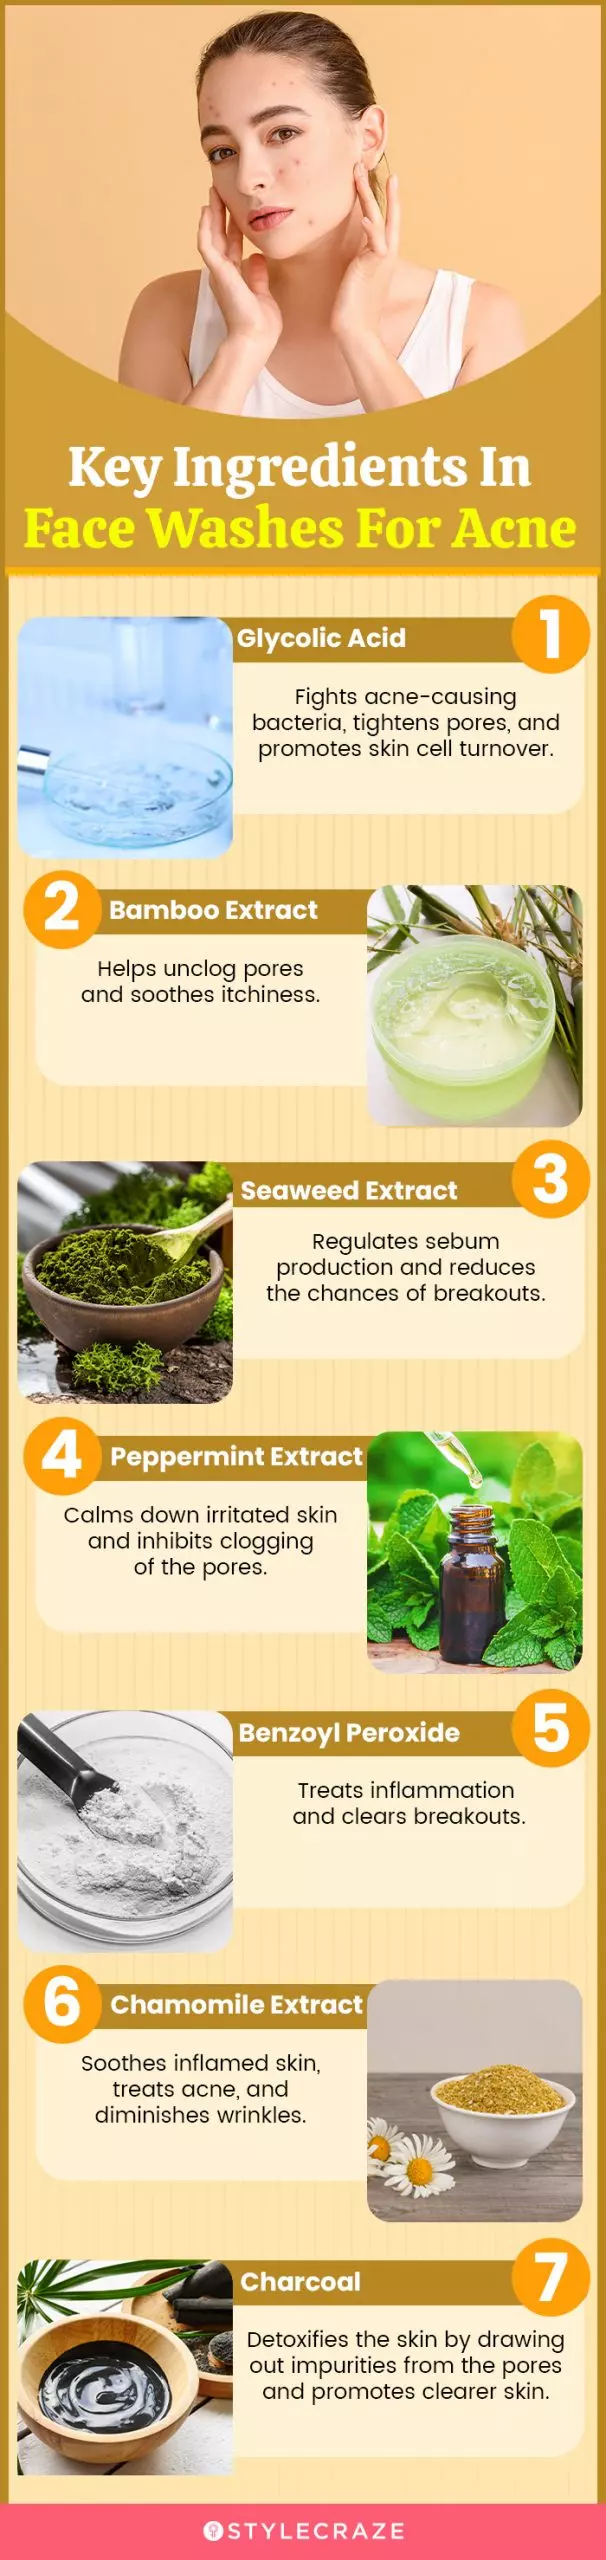 Key Ingredients In Face Washes For Acne (infographic)